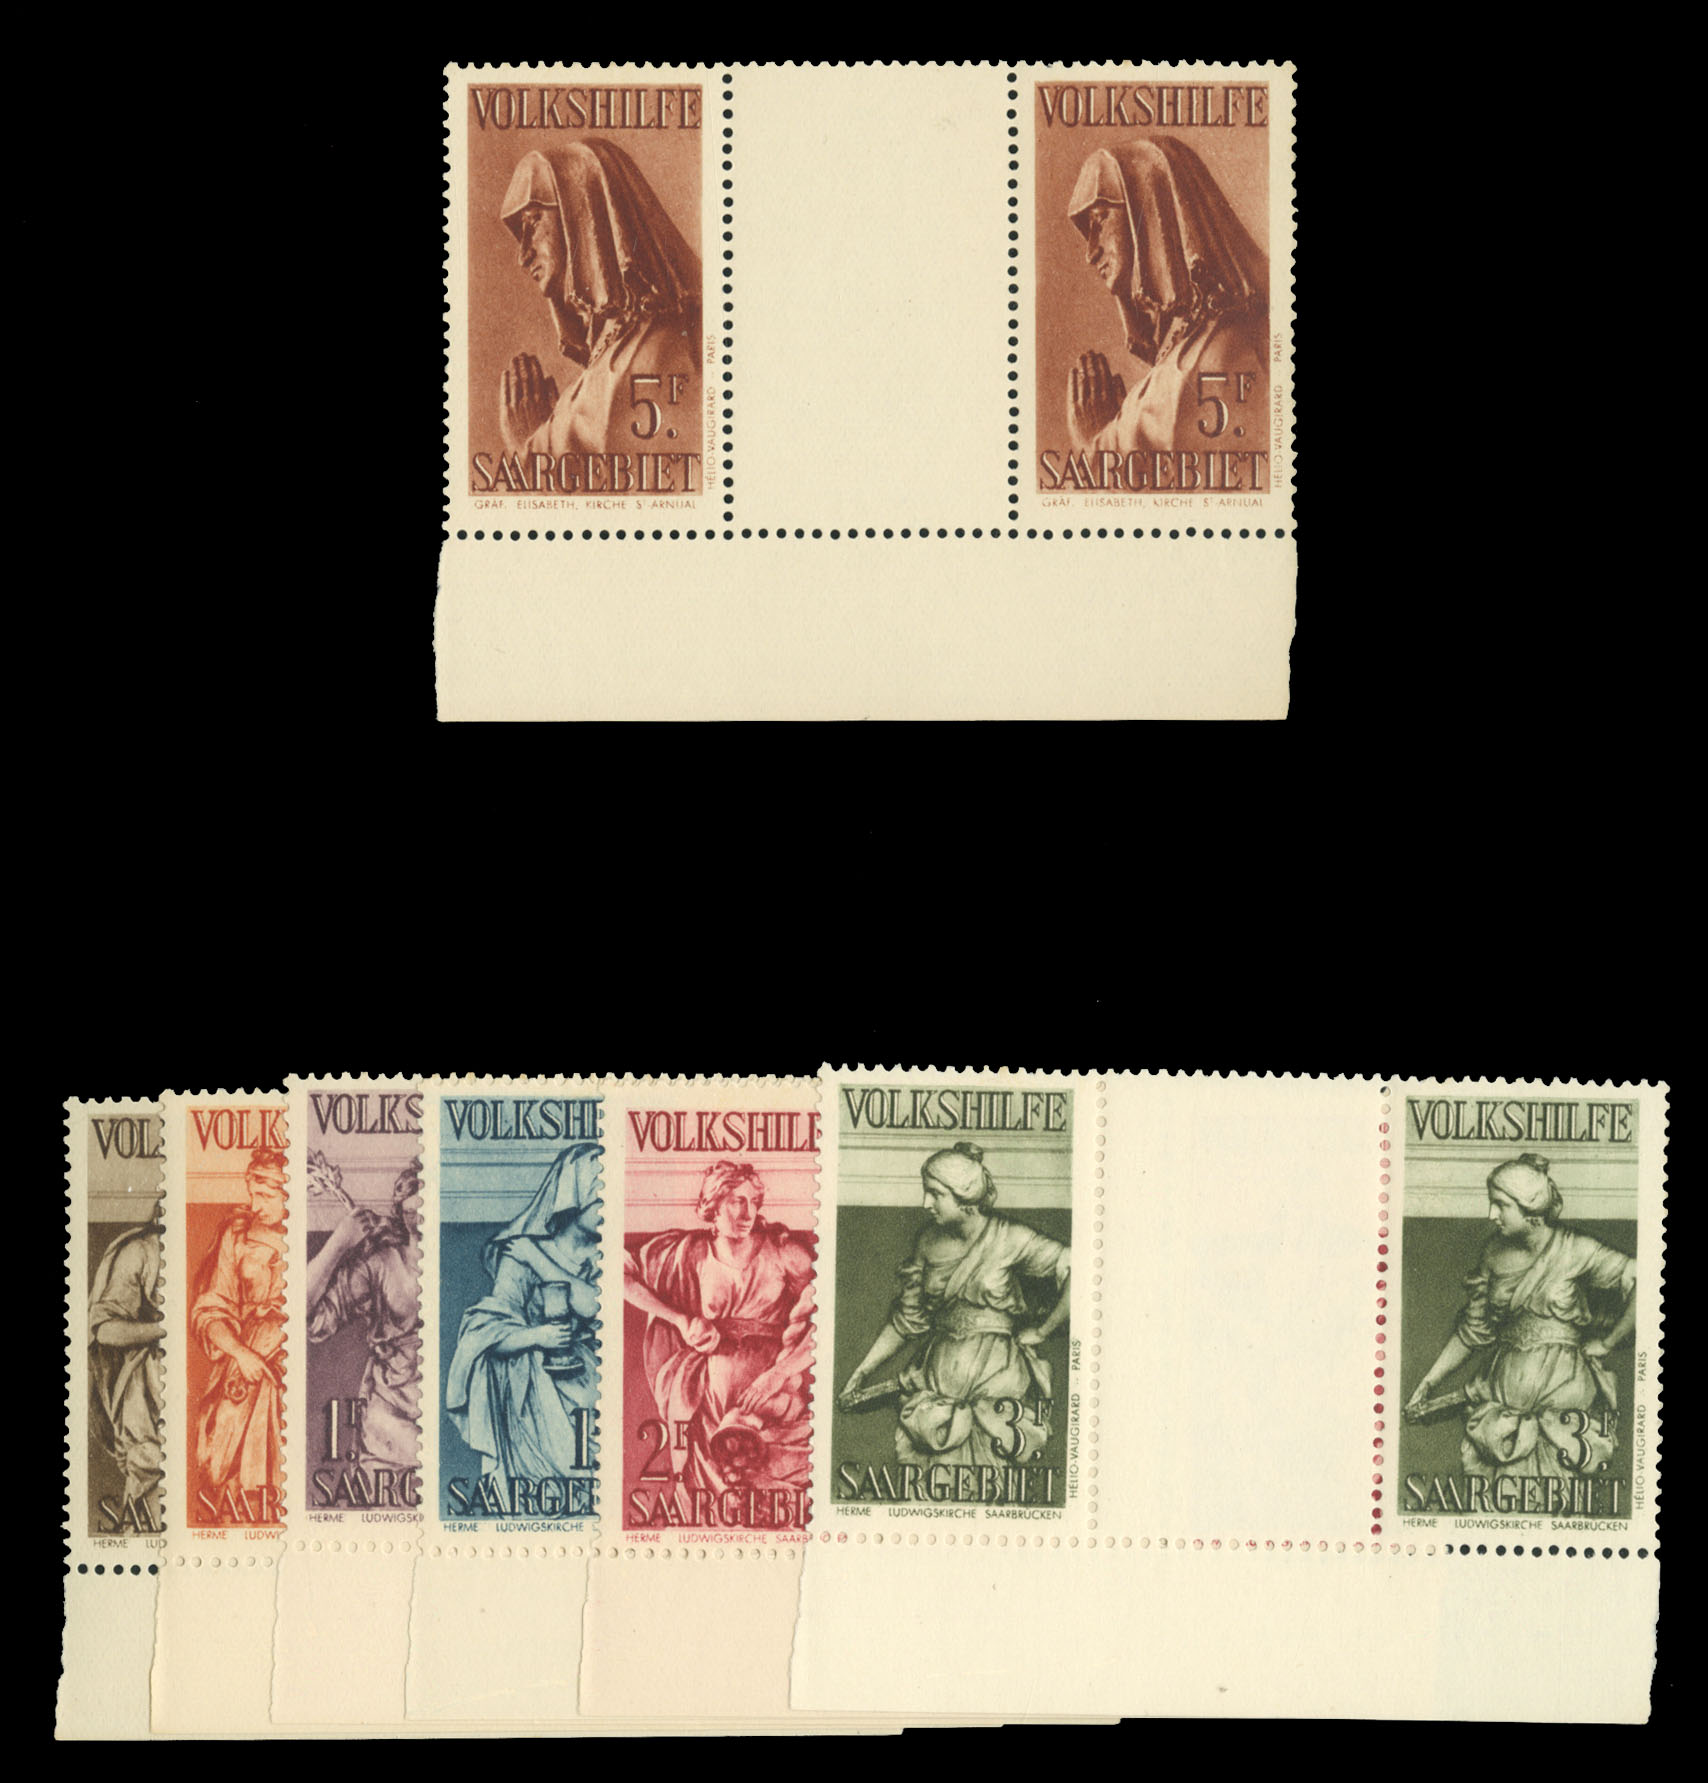 Lot 1273 - transcaucasian federated republics  -  Cherrystone Auctions U.S. & Worldwide Stamps & Postal History